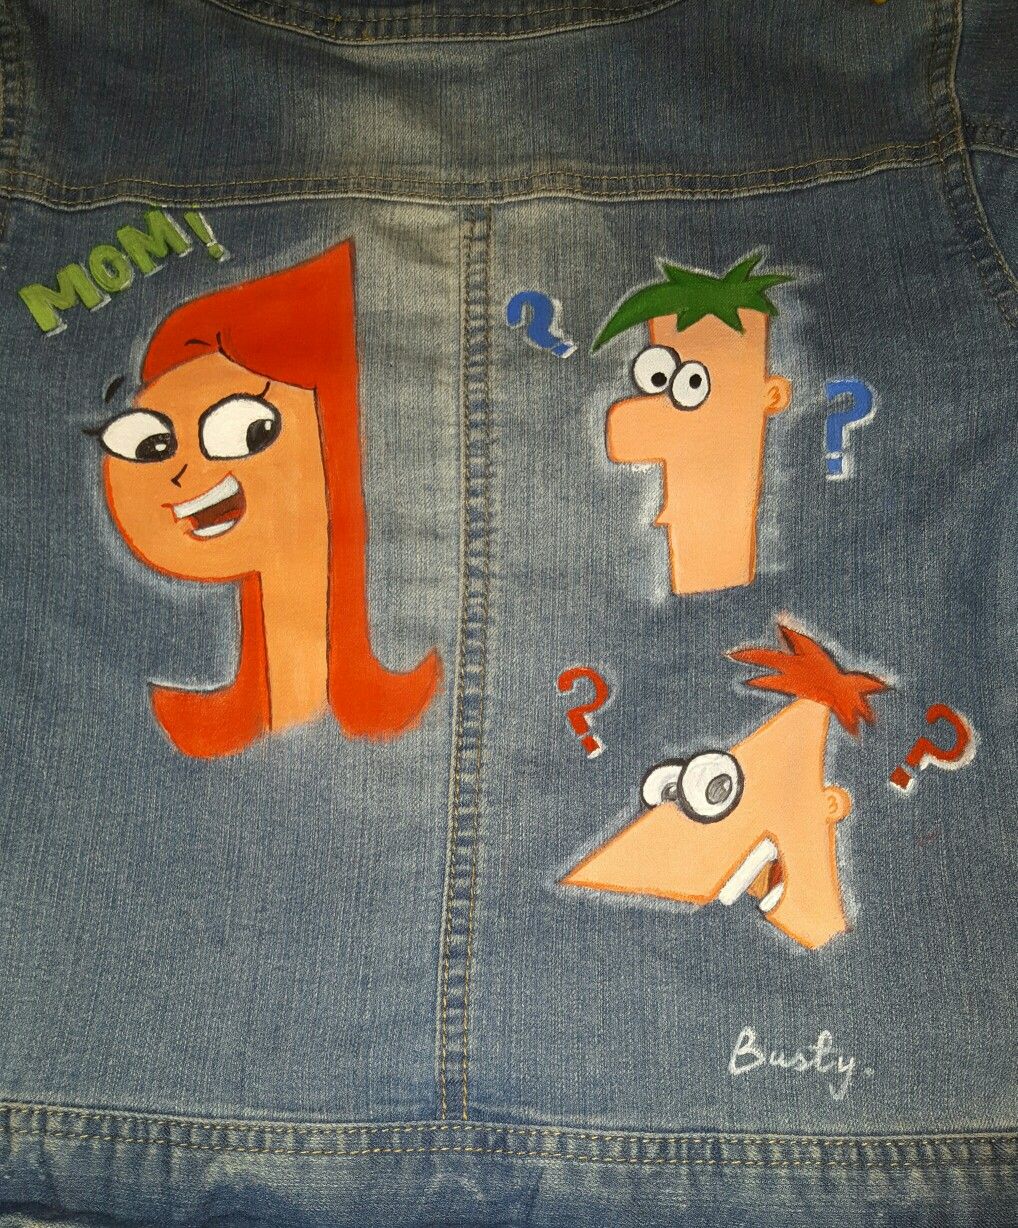 Best of Phineas and ferb busty